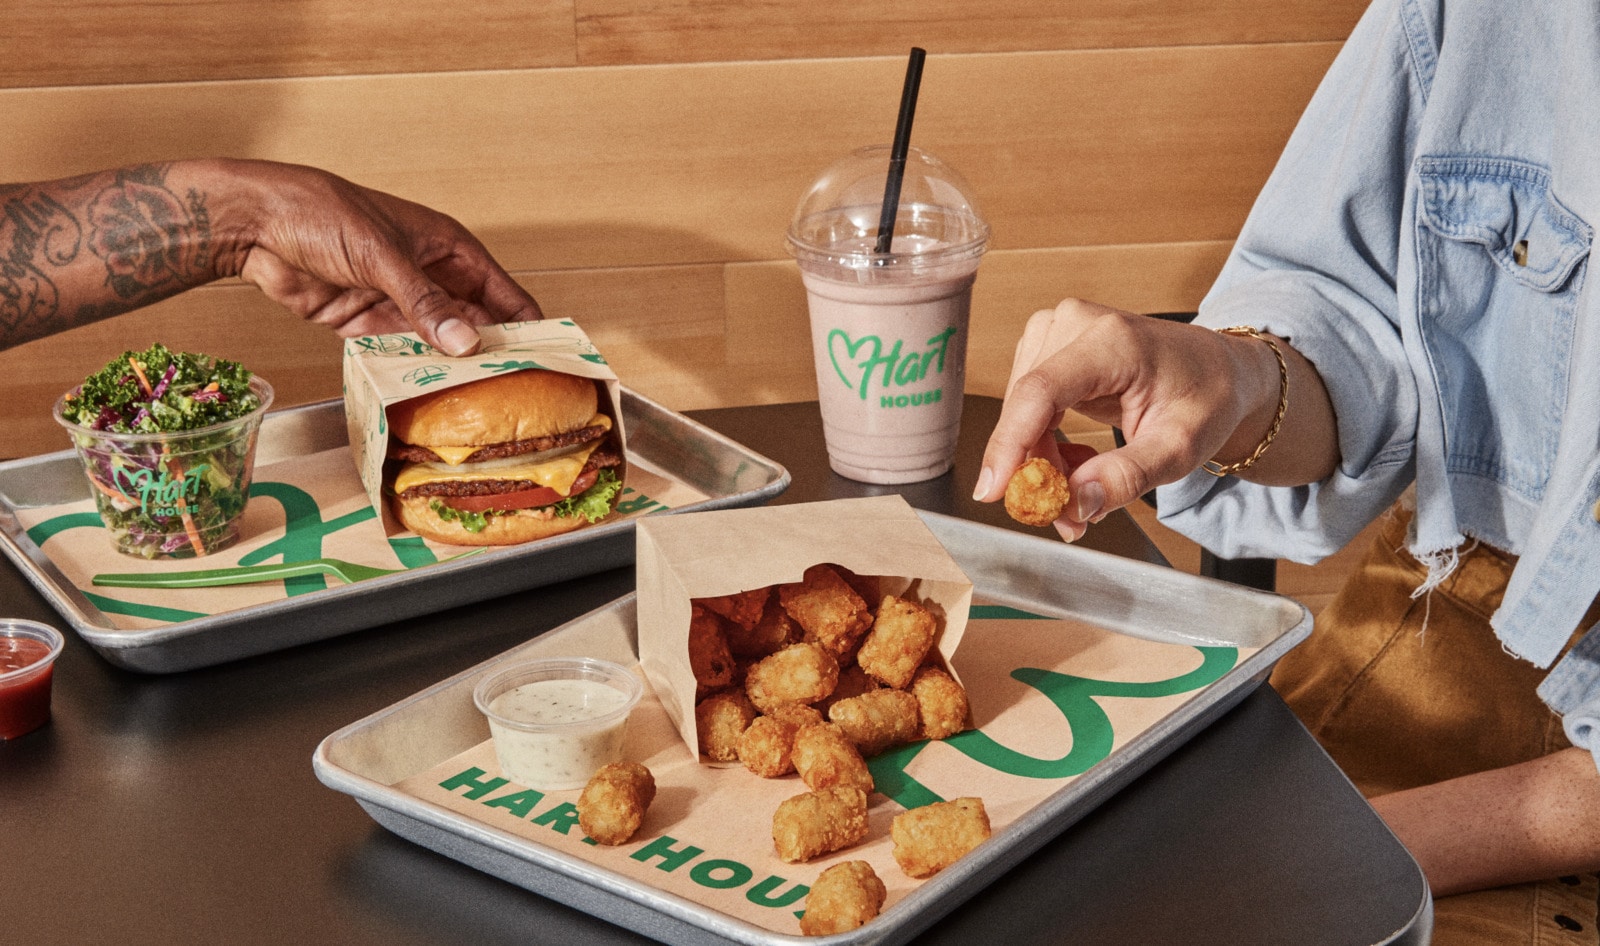 Satisfy Your Cravings With These 15 Vegan Fast-Food Chains